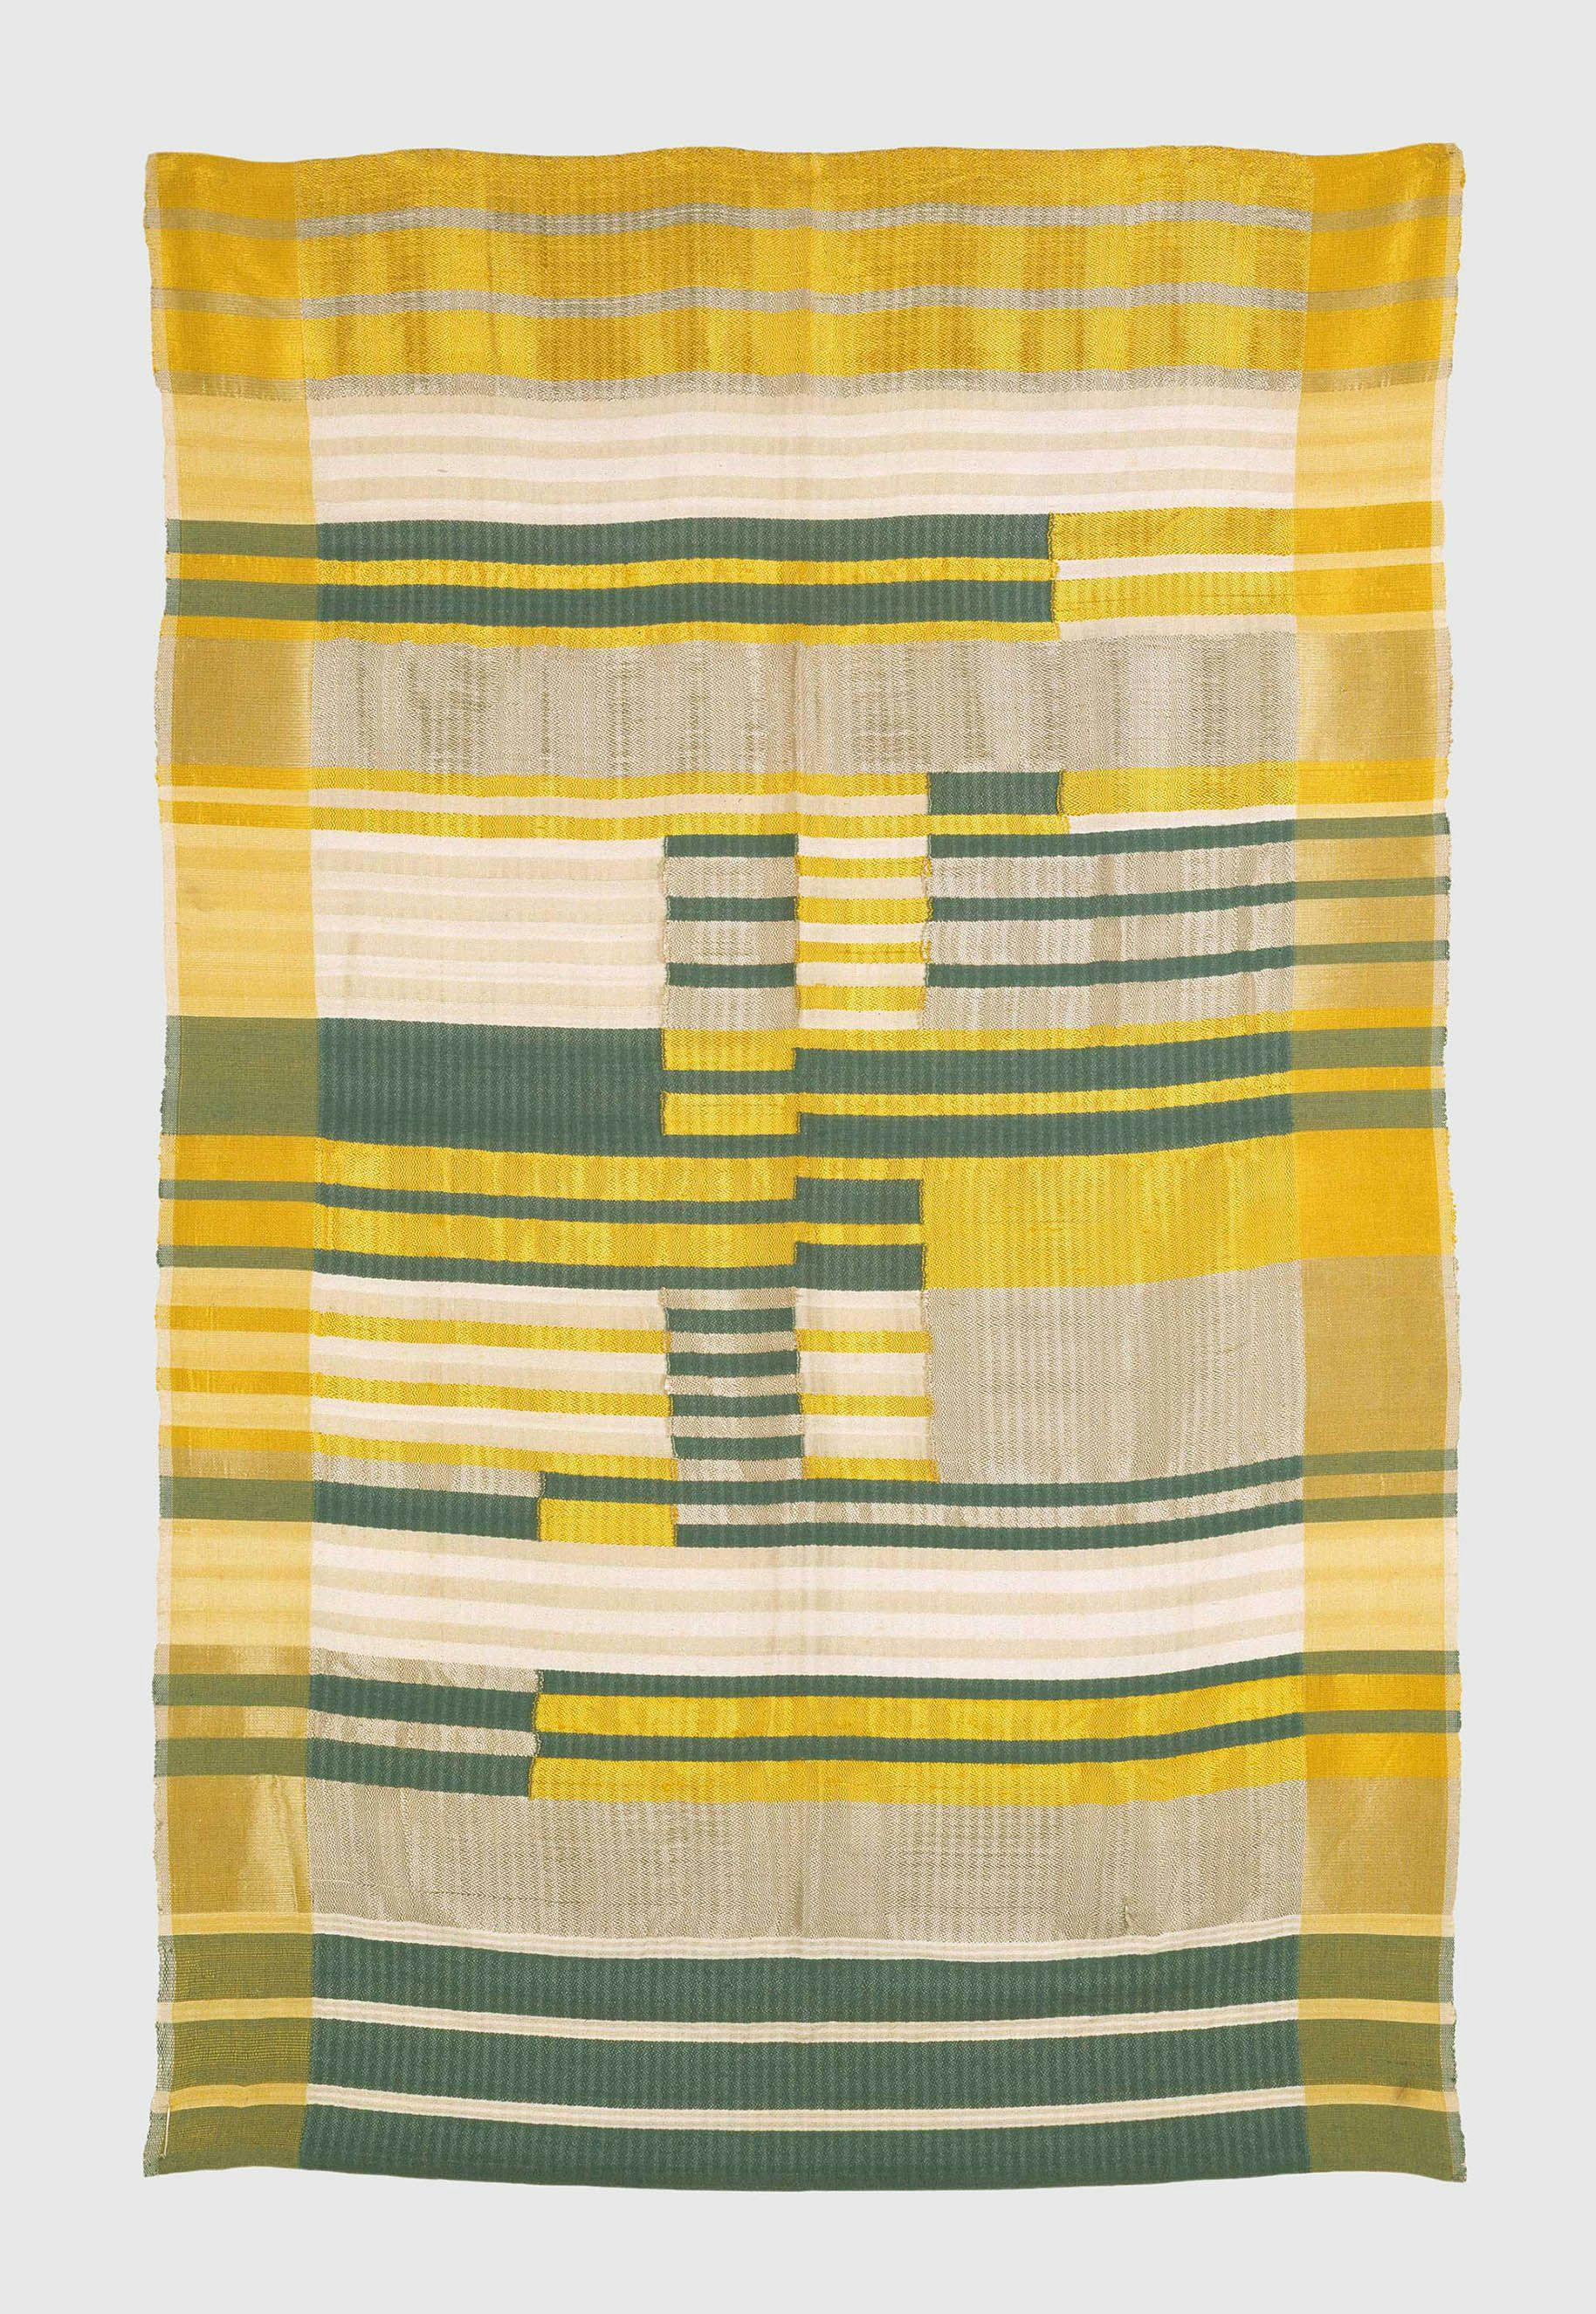 A silk, cotton, and acetate textile by Anni Albers, titled Wallhanging, dated 1925.